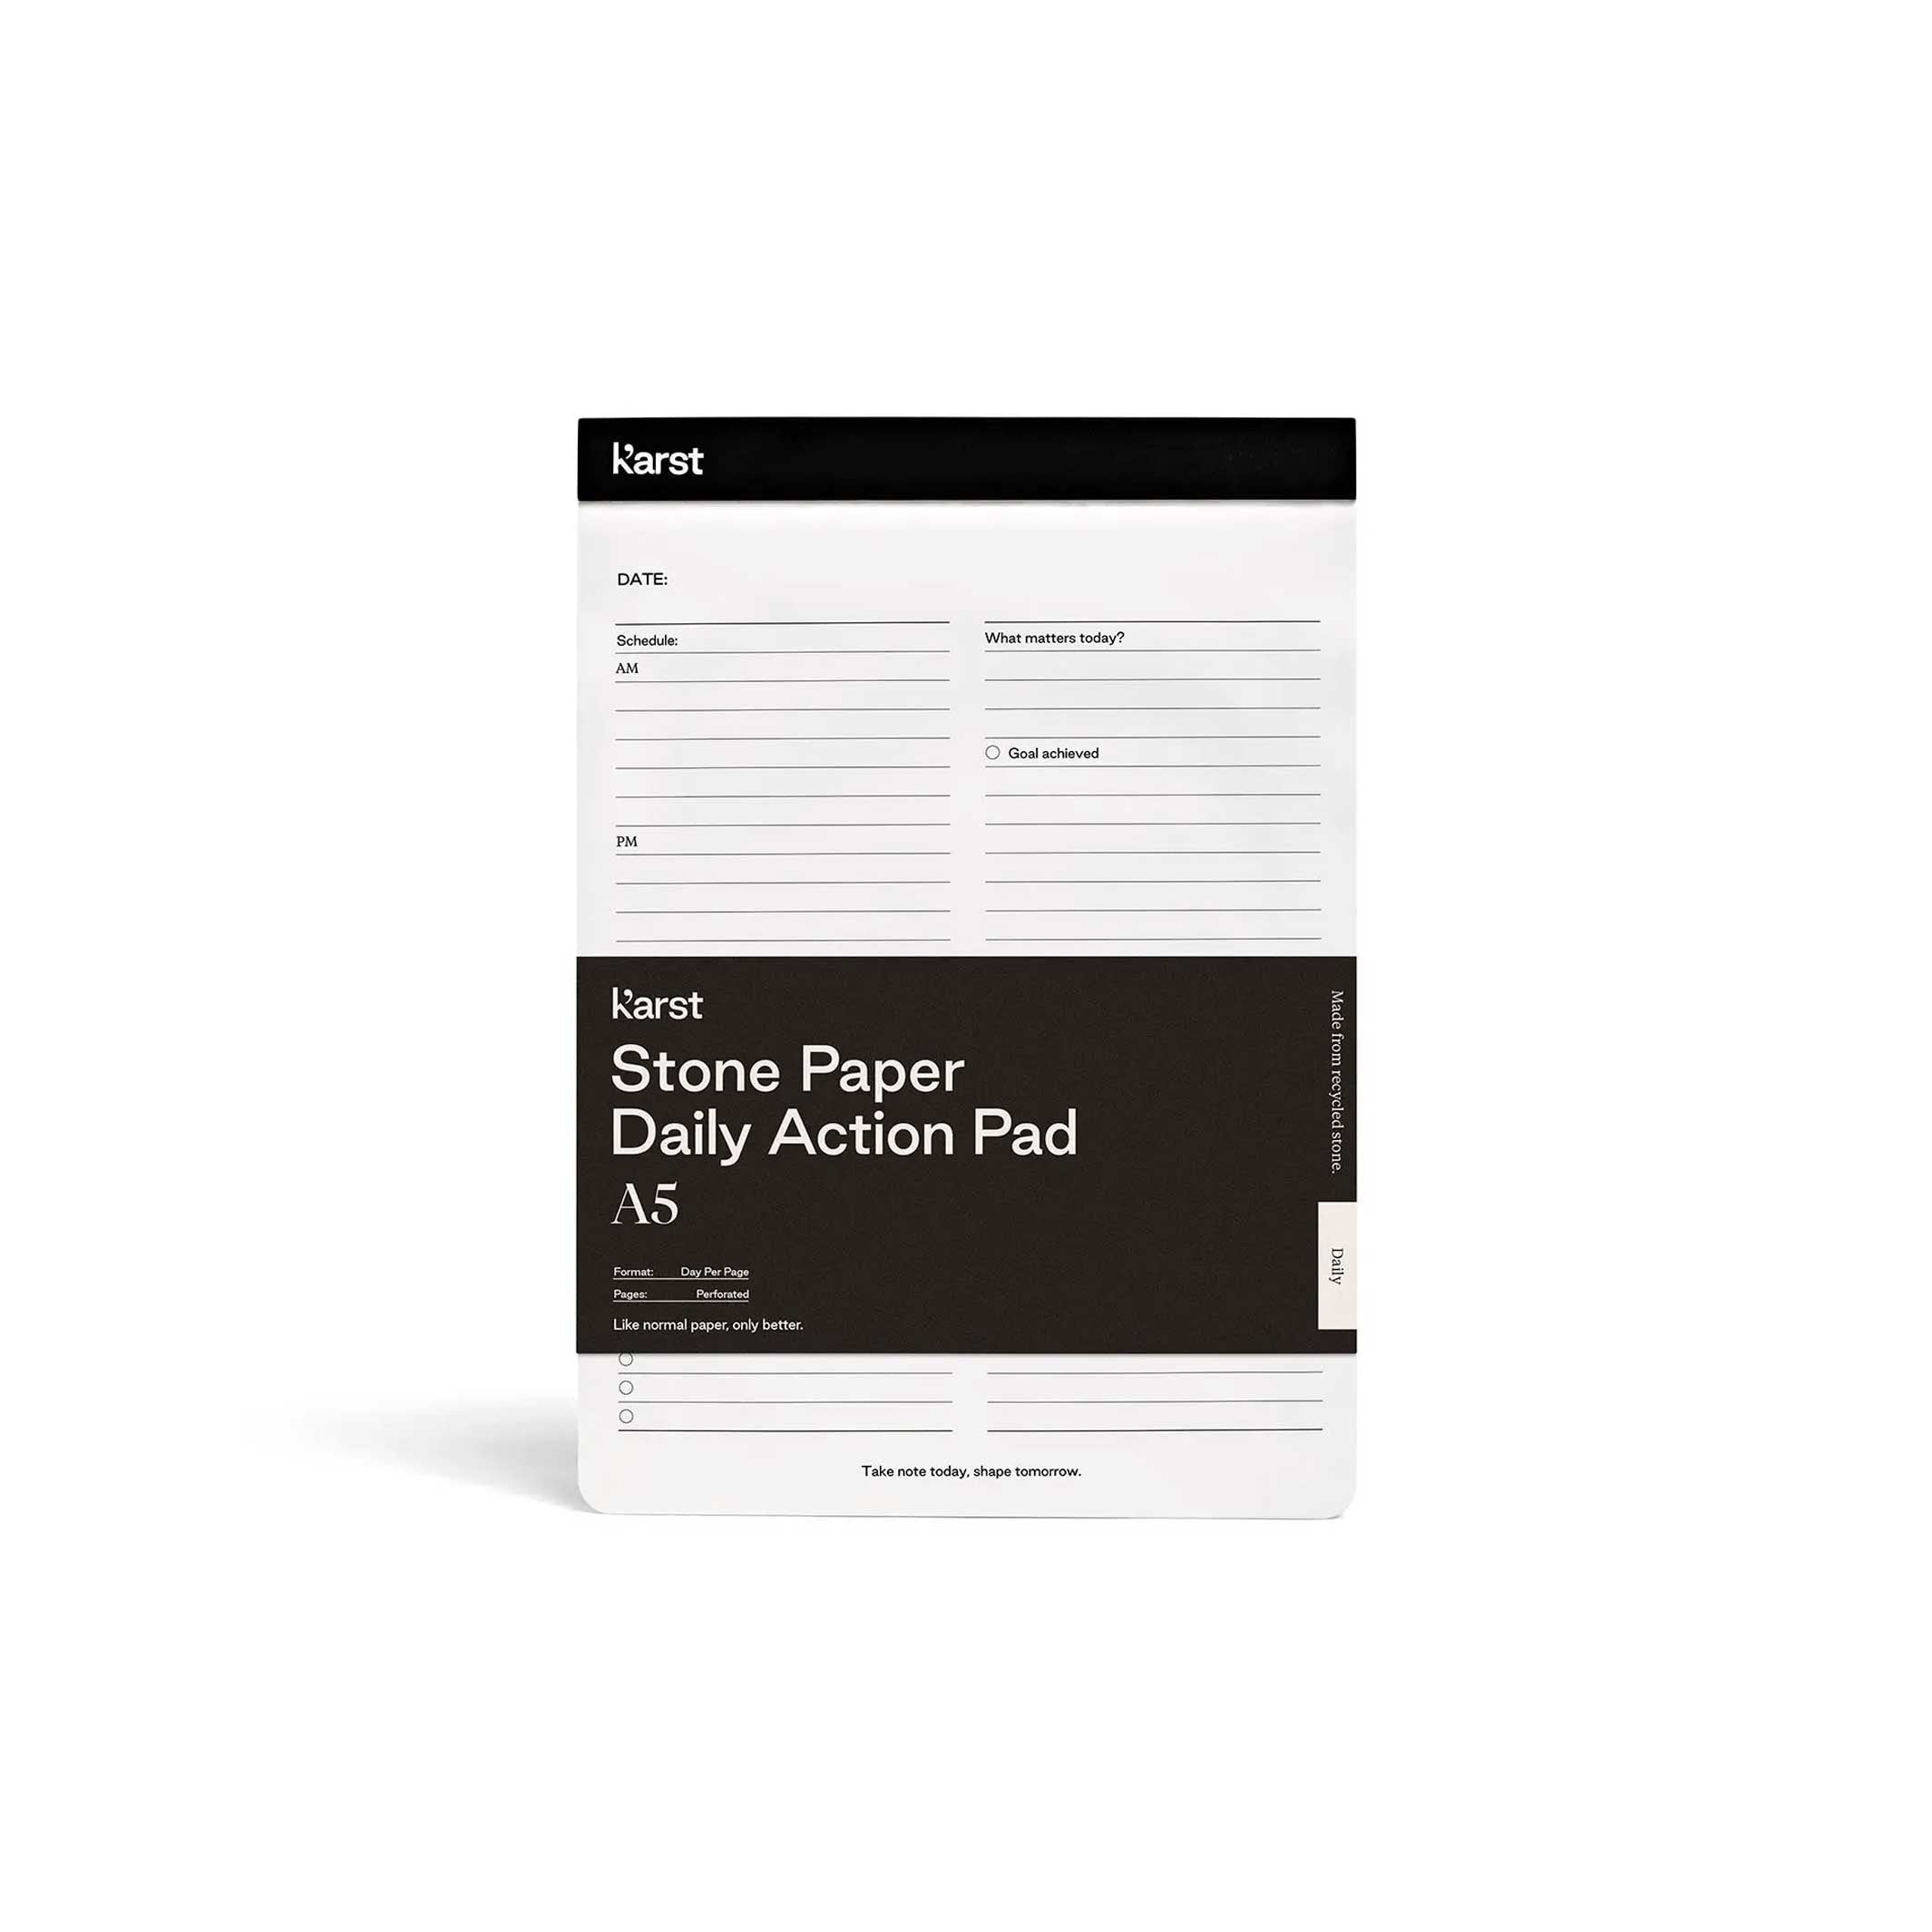 DAILY ACTION PAD | A5 | Karst Stone Paper